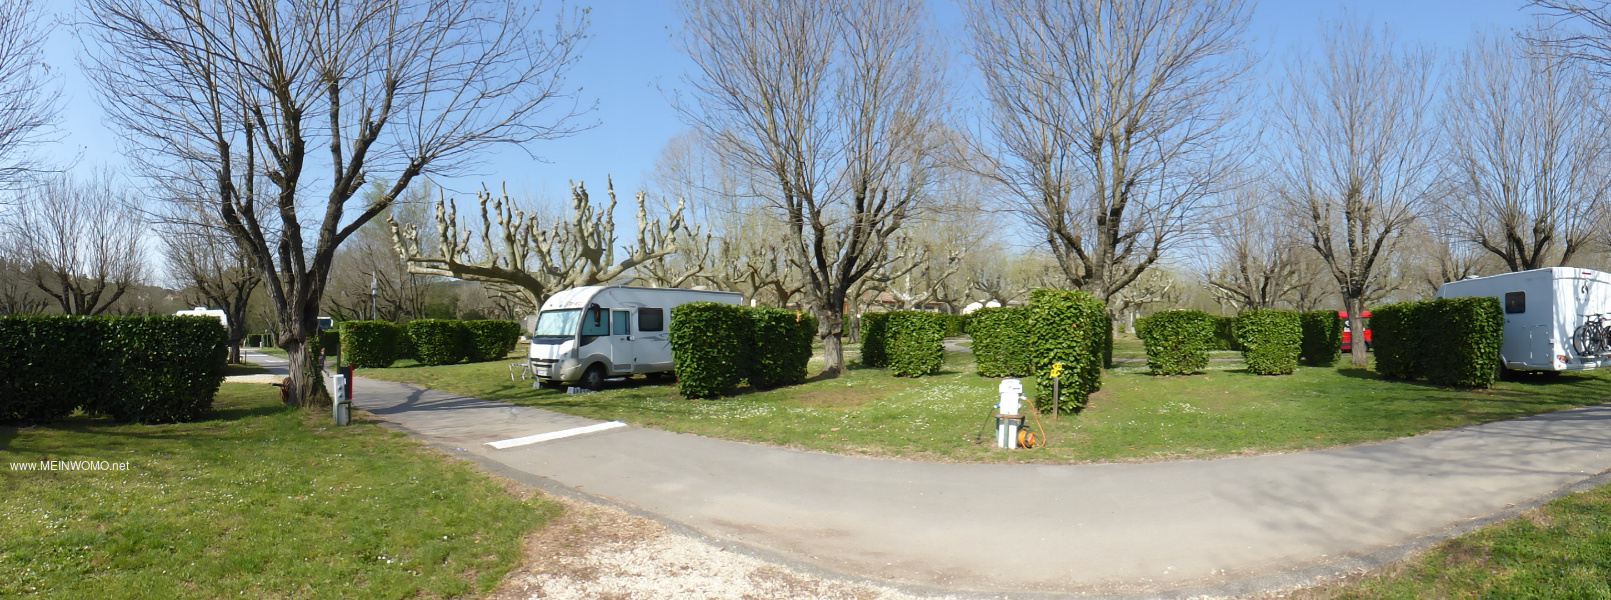 The campsite is close to the main road and bridge, so the closer pitches in the entrance area are no ...